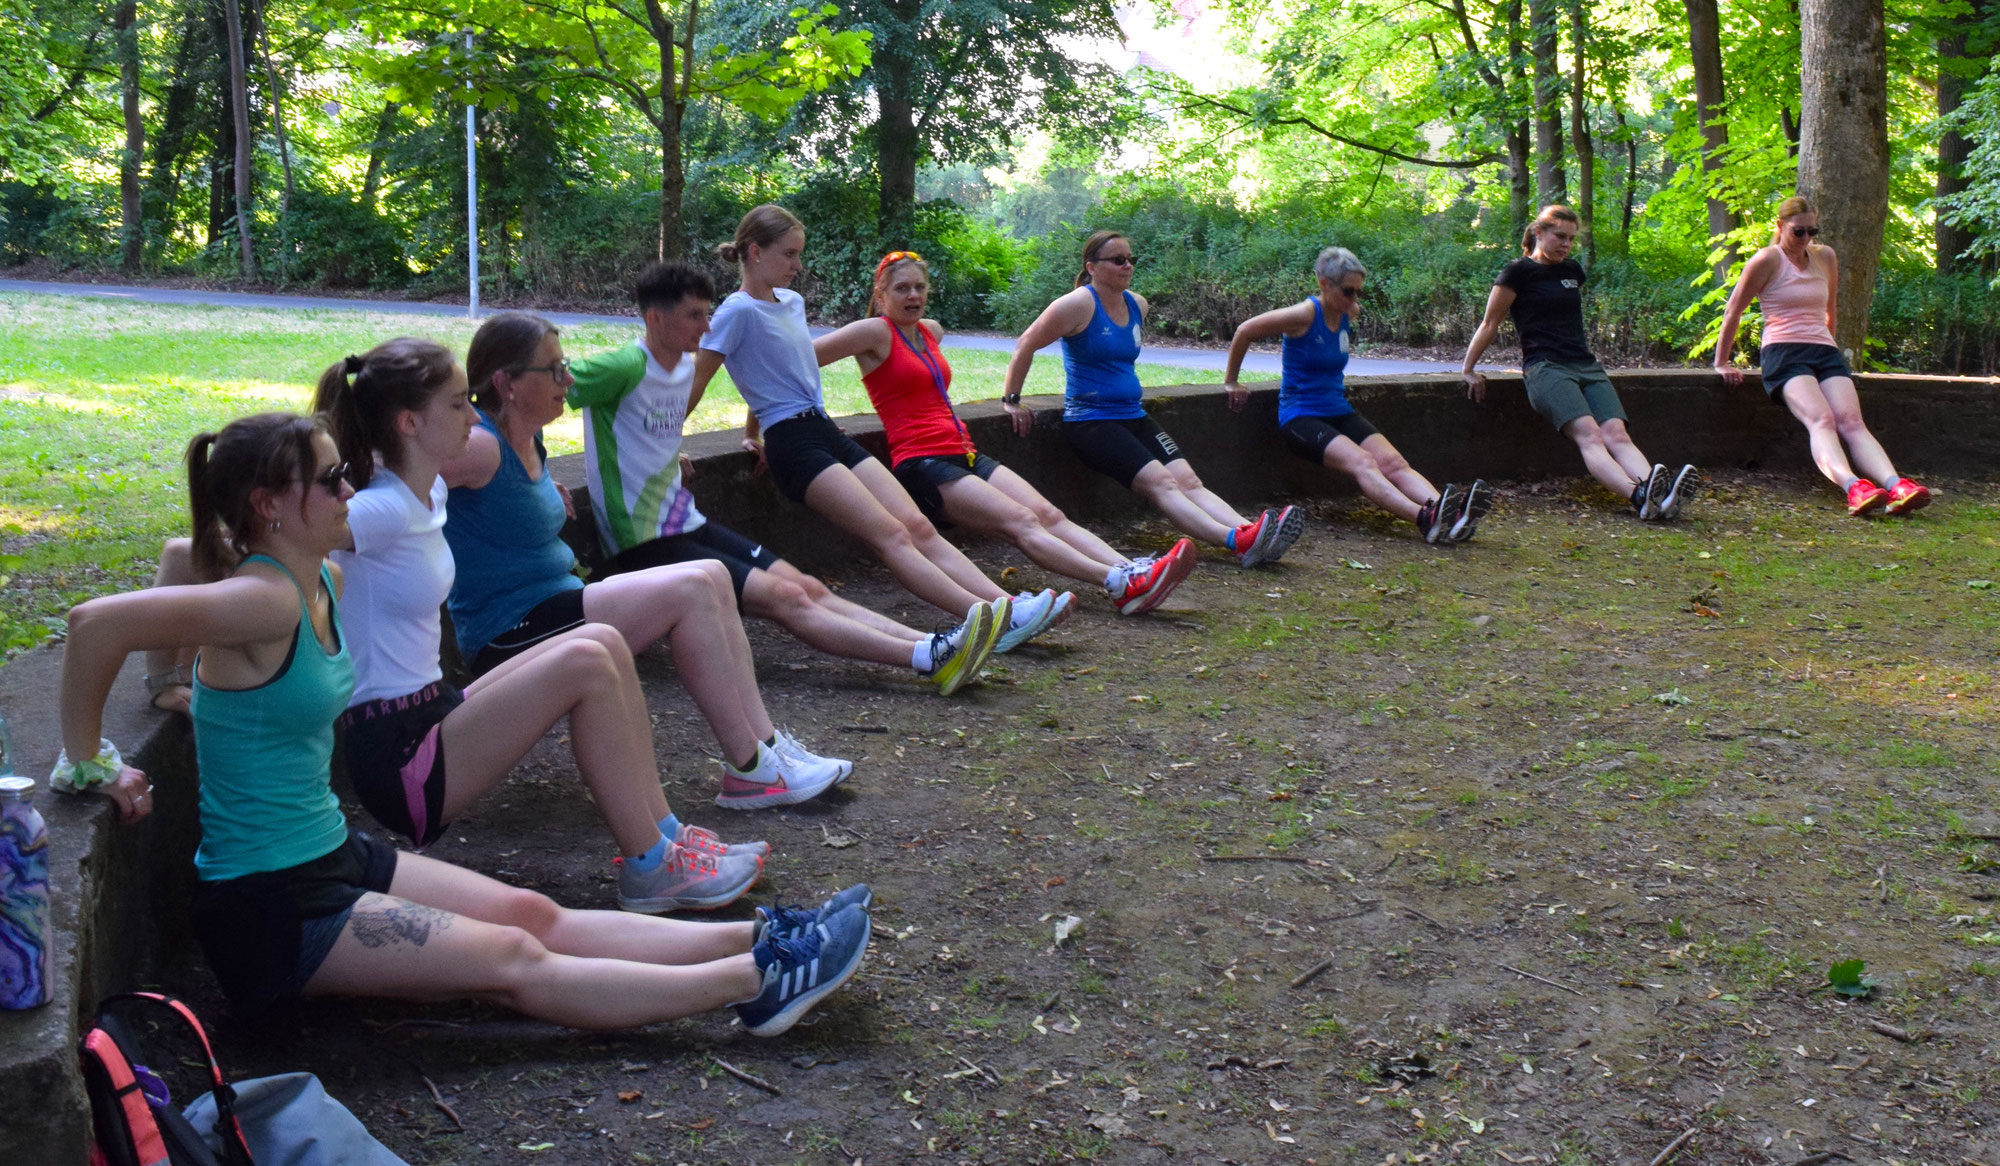 Outdoor-Fitness-Kurs „Go to be fit“ sehr gut angenommen